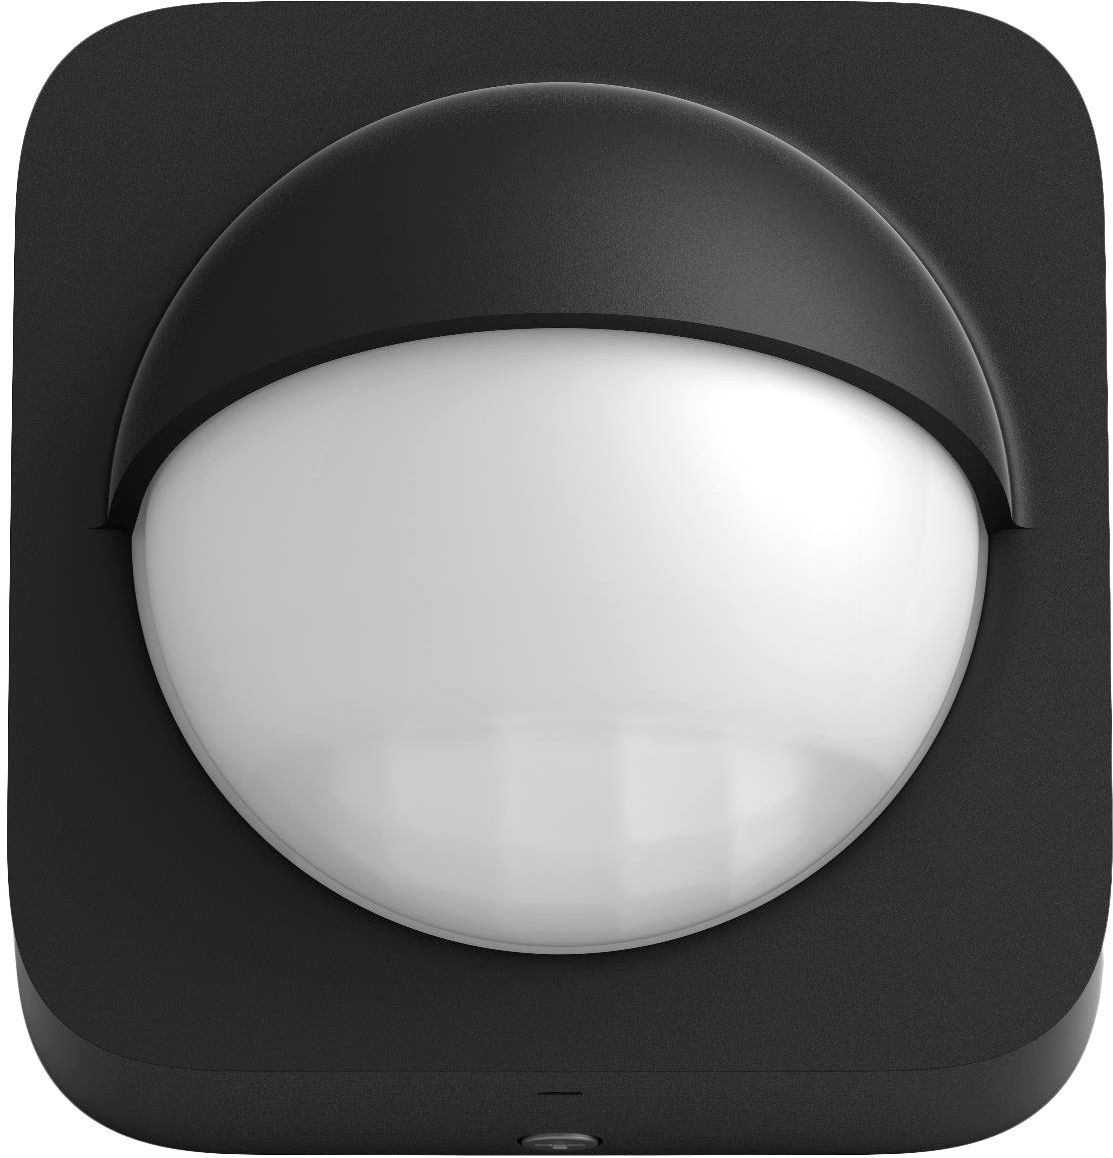 Philips Hue Outdoor Motion Sensor review: A must-have accessory for Hue  smart lighting owners